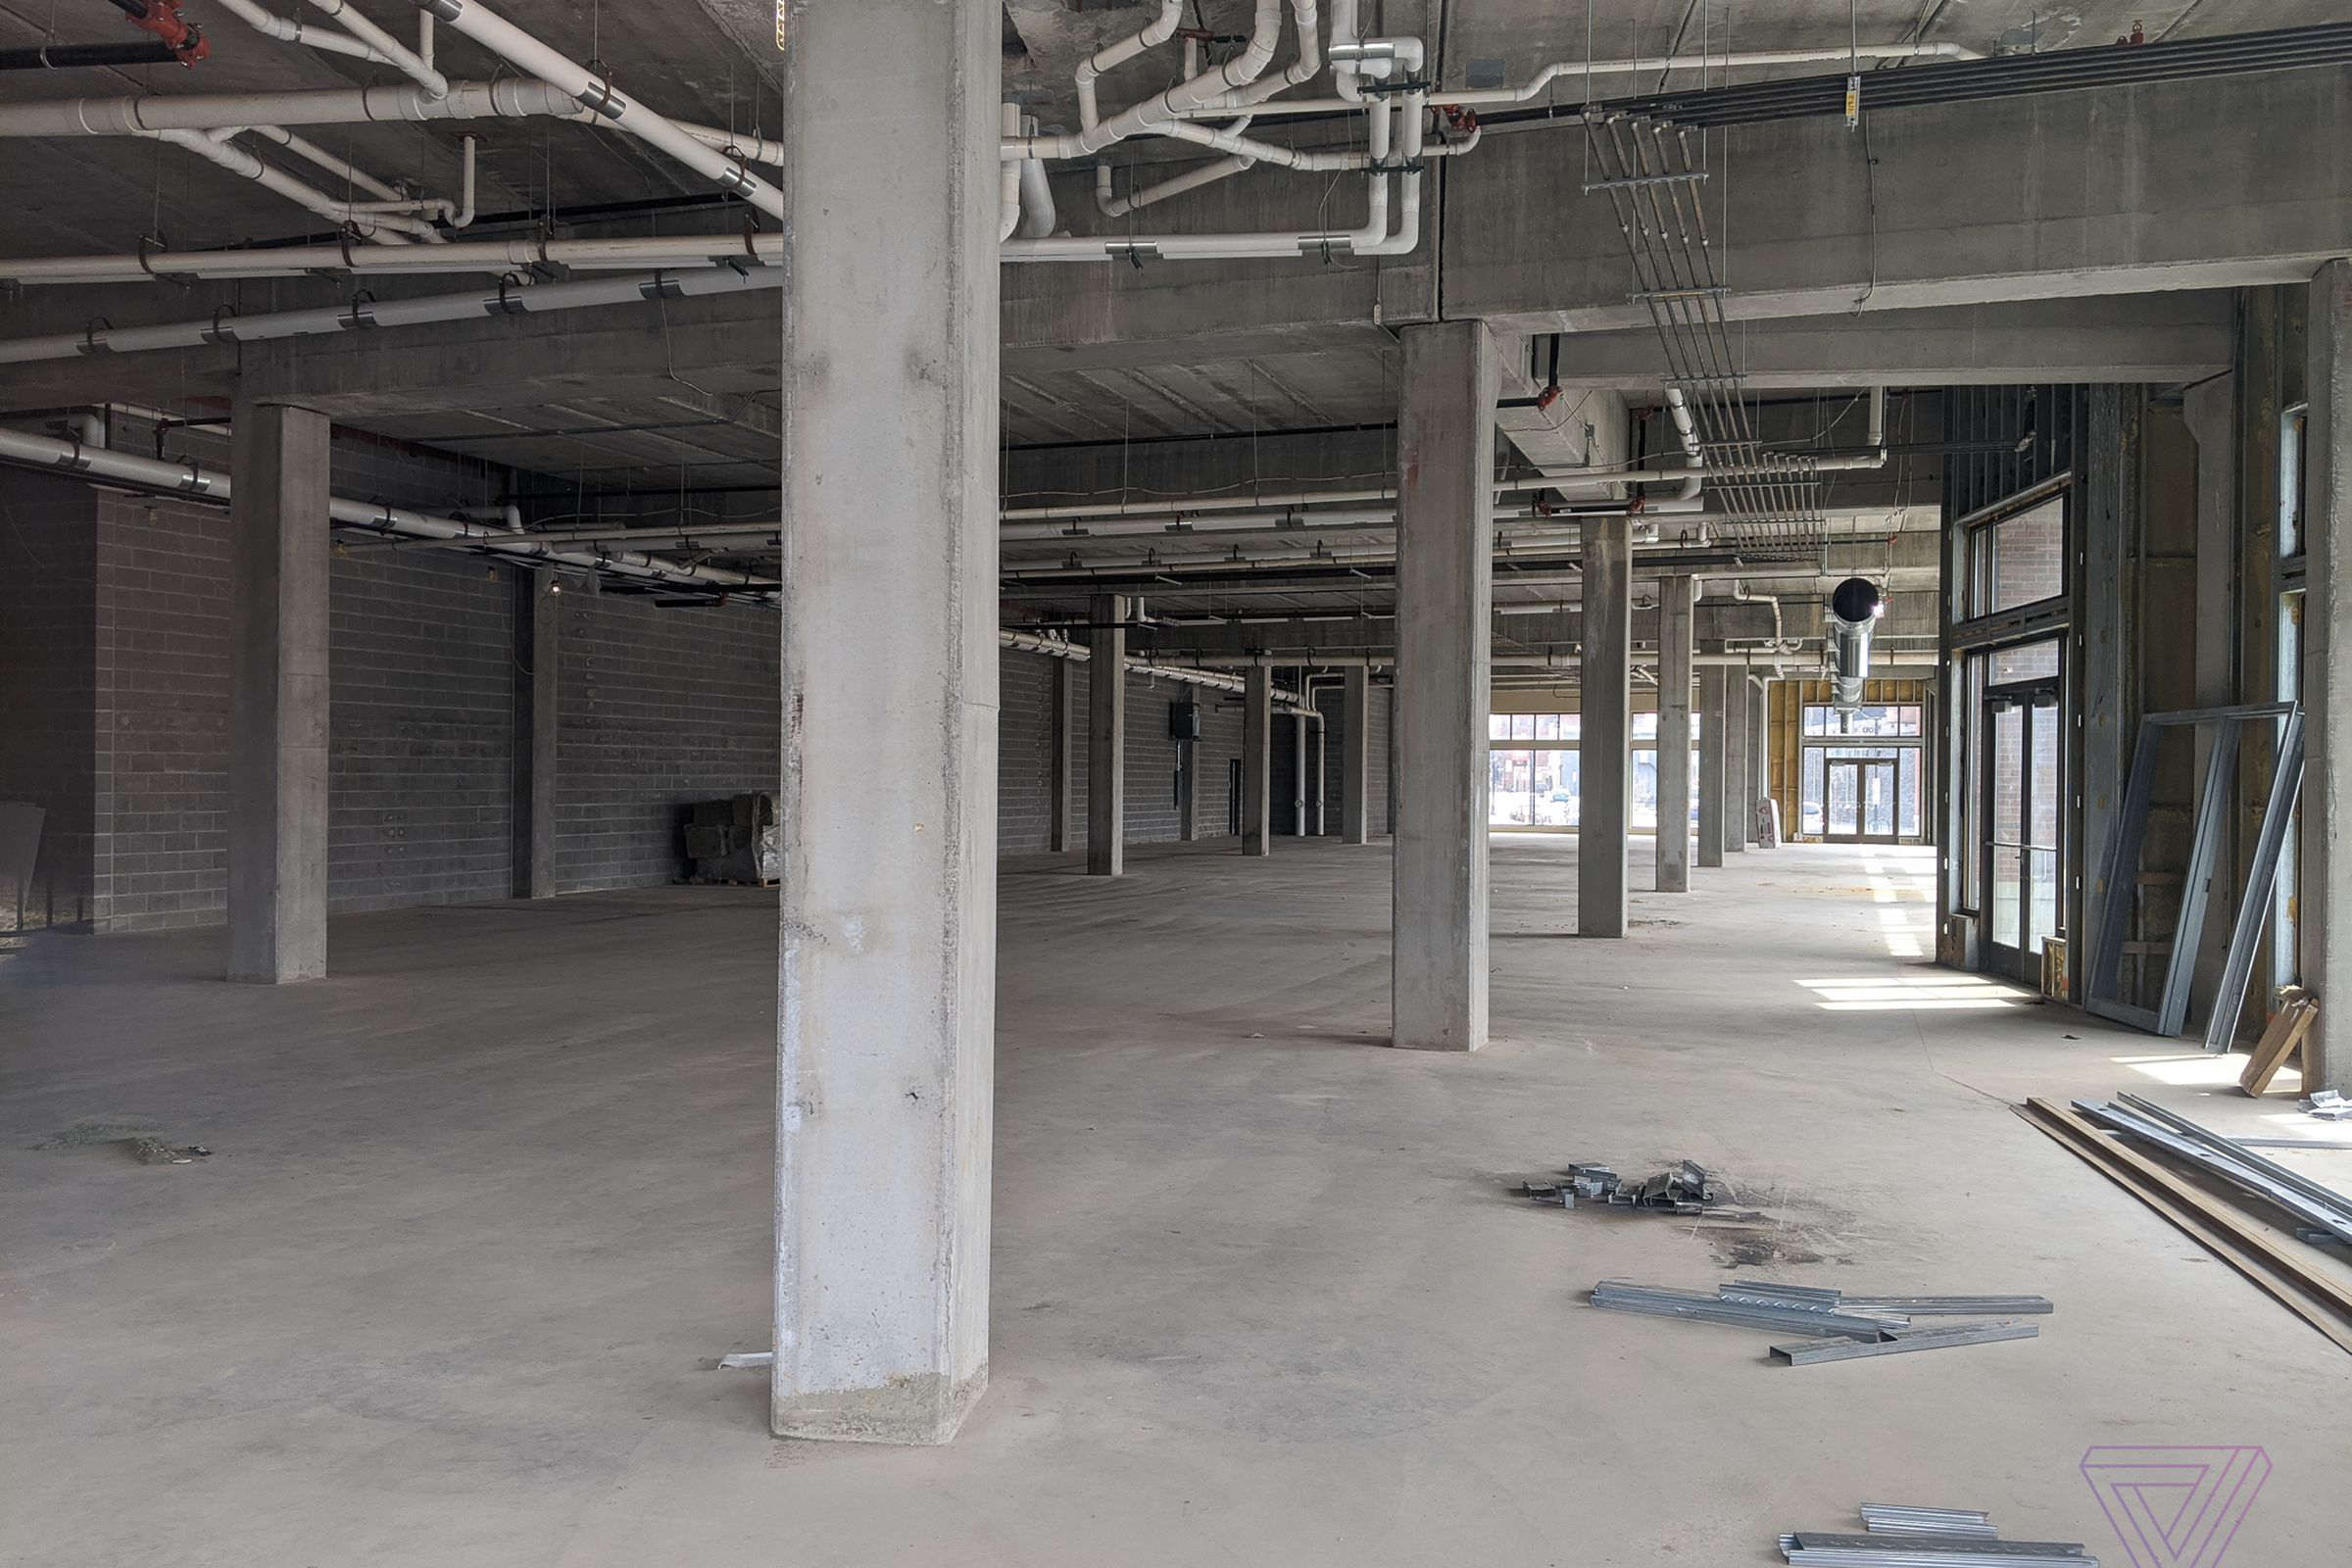 The empty Foxconn “innovation center” in Eau Claire, Wisconsin, on April 10th, 2020